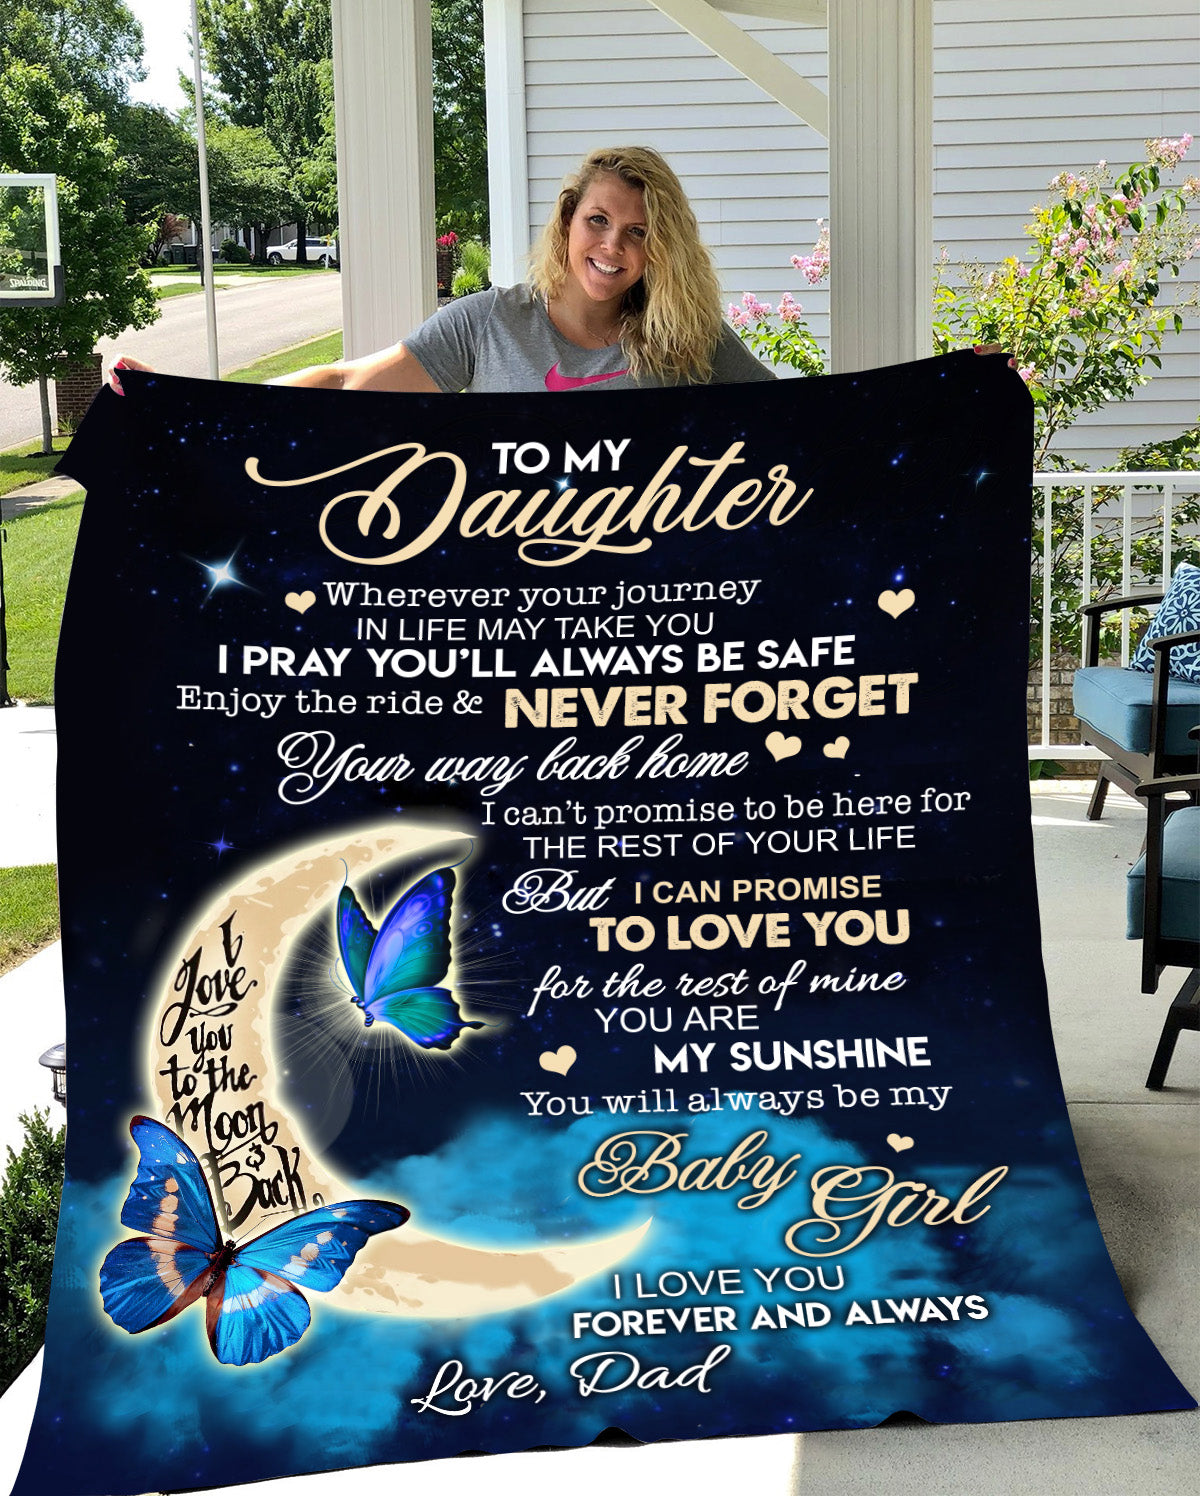 To My Daughter | I Pray You'll Always Be Safe | Premium Mink Sherpa Blanket 50x60